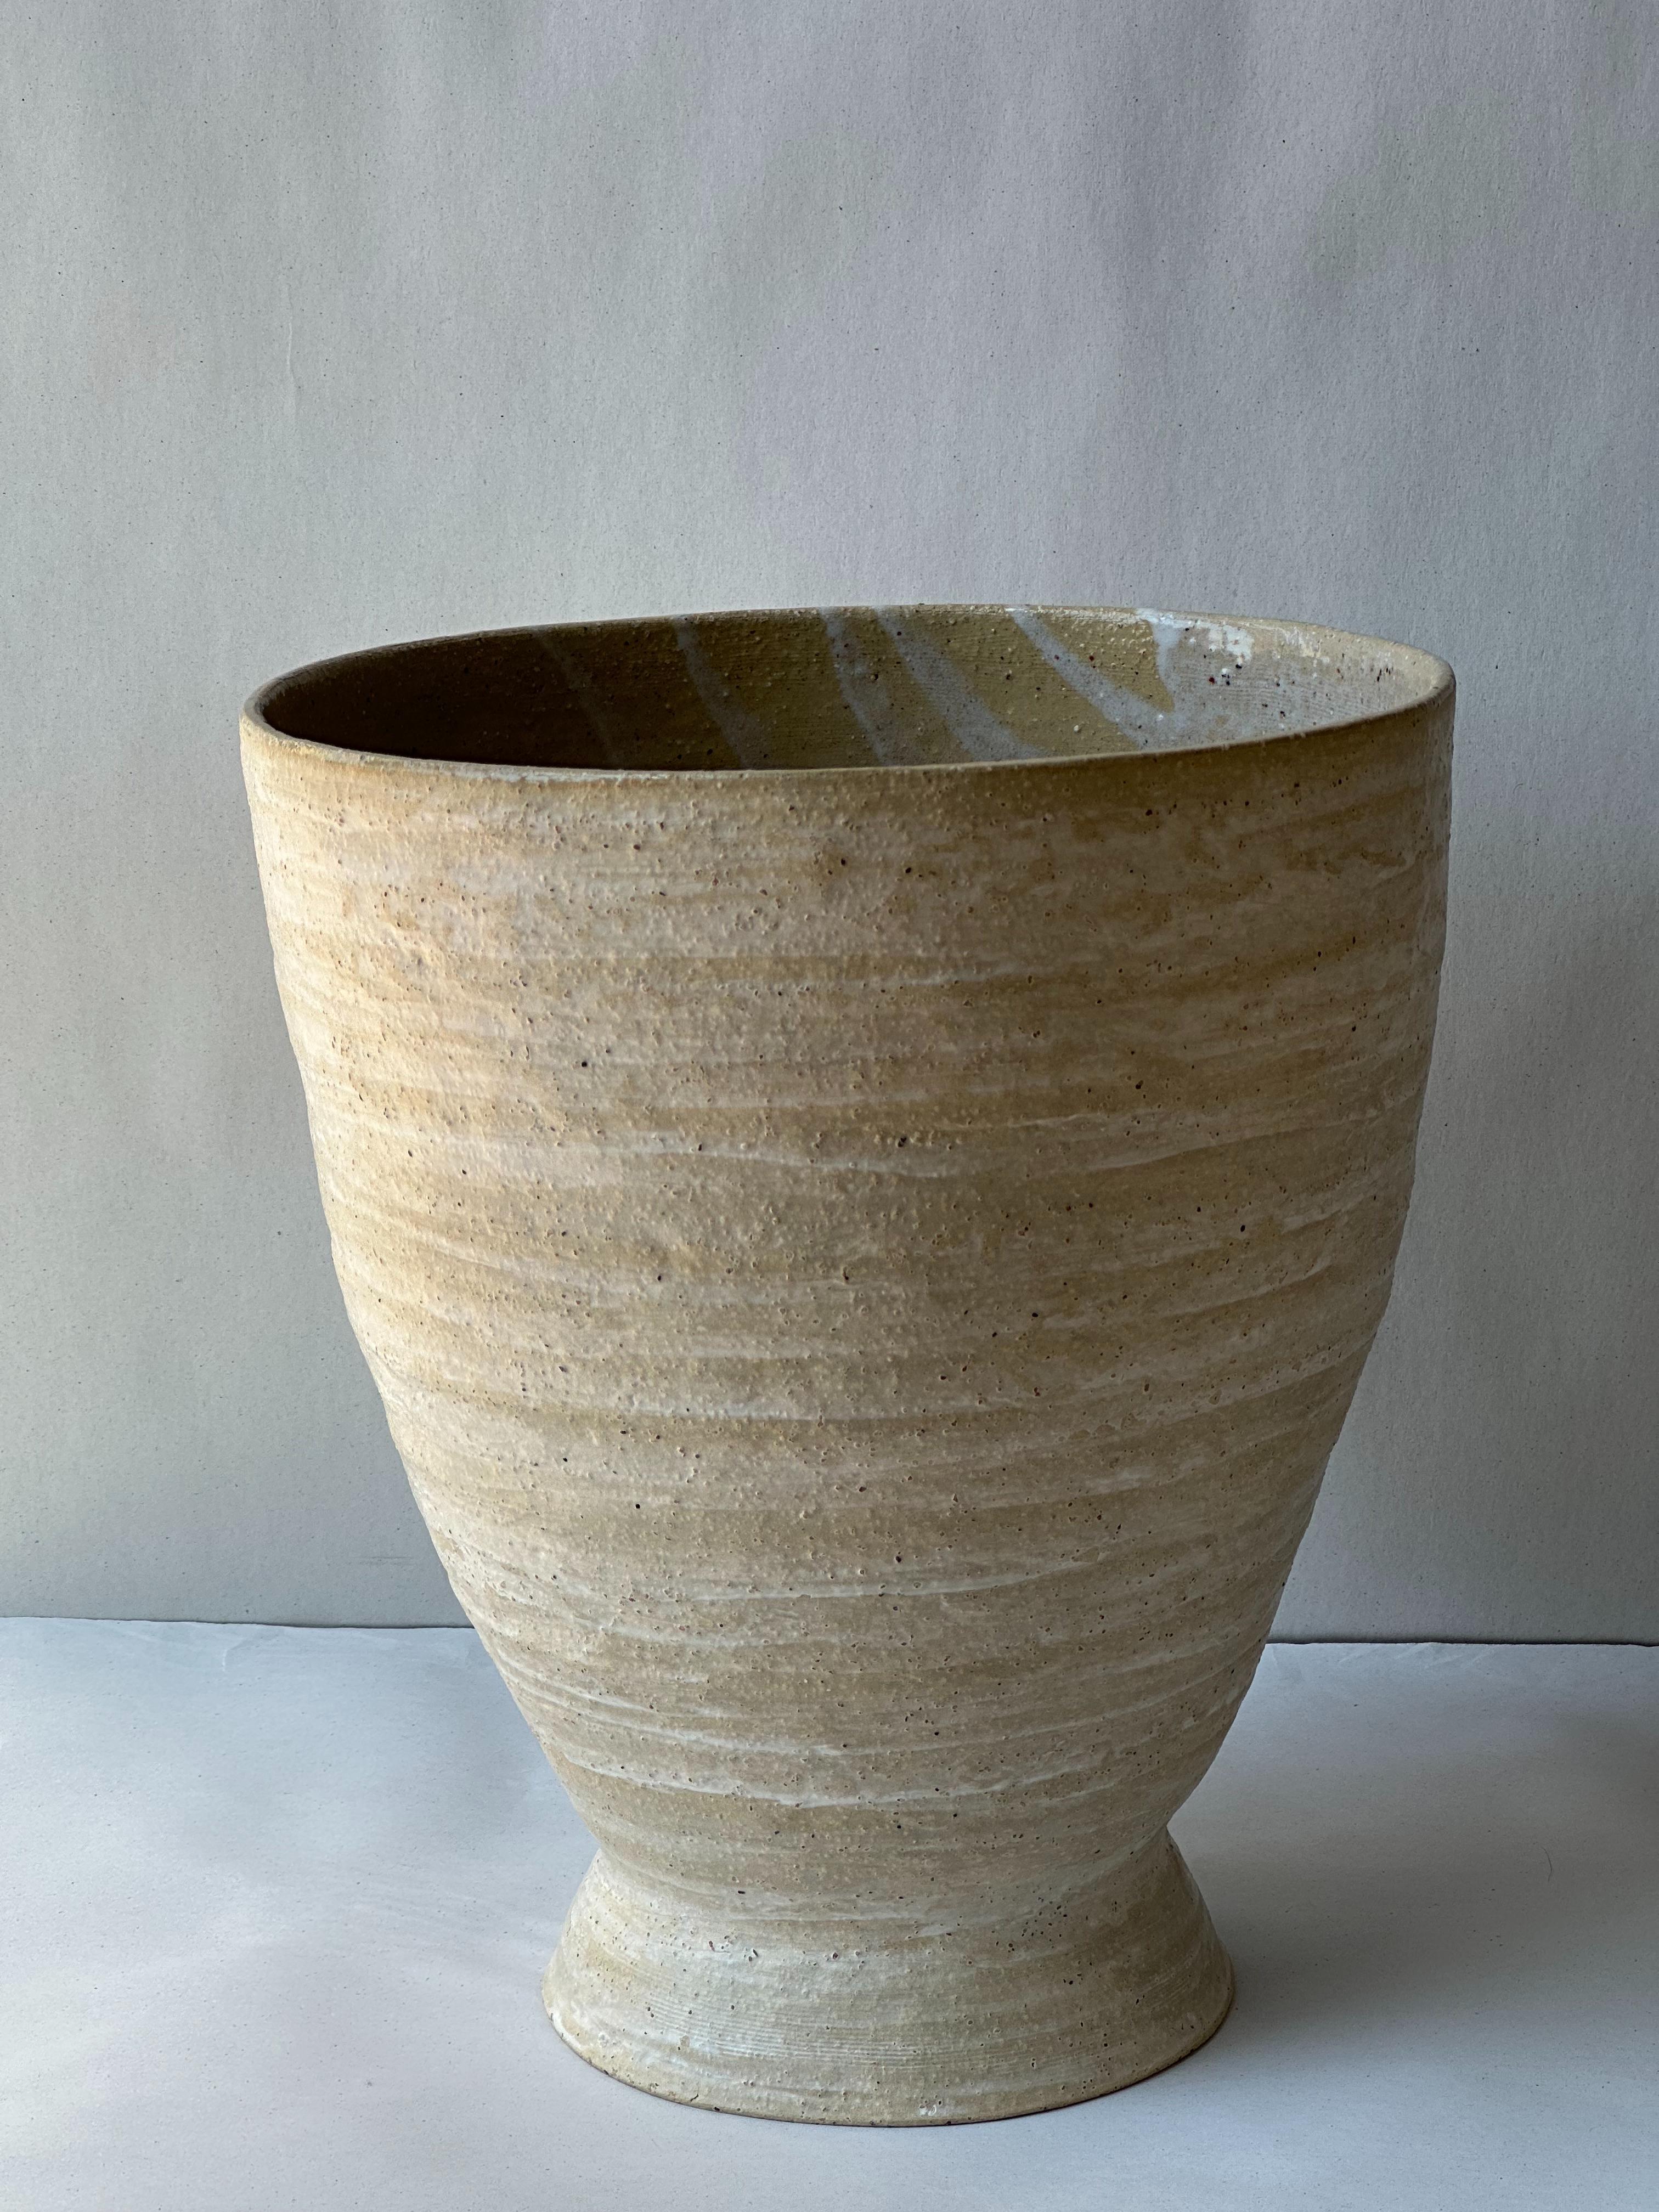 Beige Stoneware Krater Vase by Elena Vasilantonaki
Unique
Dimensions: ⌀ 25 x H 30 cm (Dimensions may vary)
Materials: Stoneware
Available finishes: Black, Beige, Brown, Red, White Patina. Interior glazed with Ash Glaze

Growing up in Greece I was